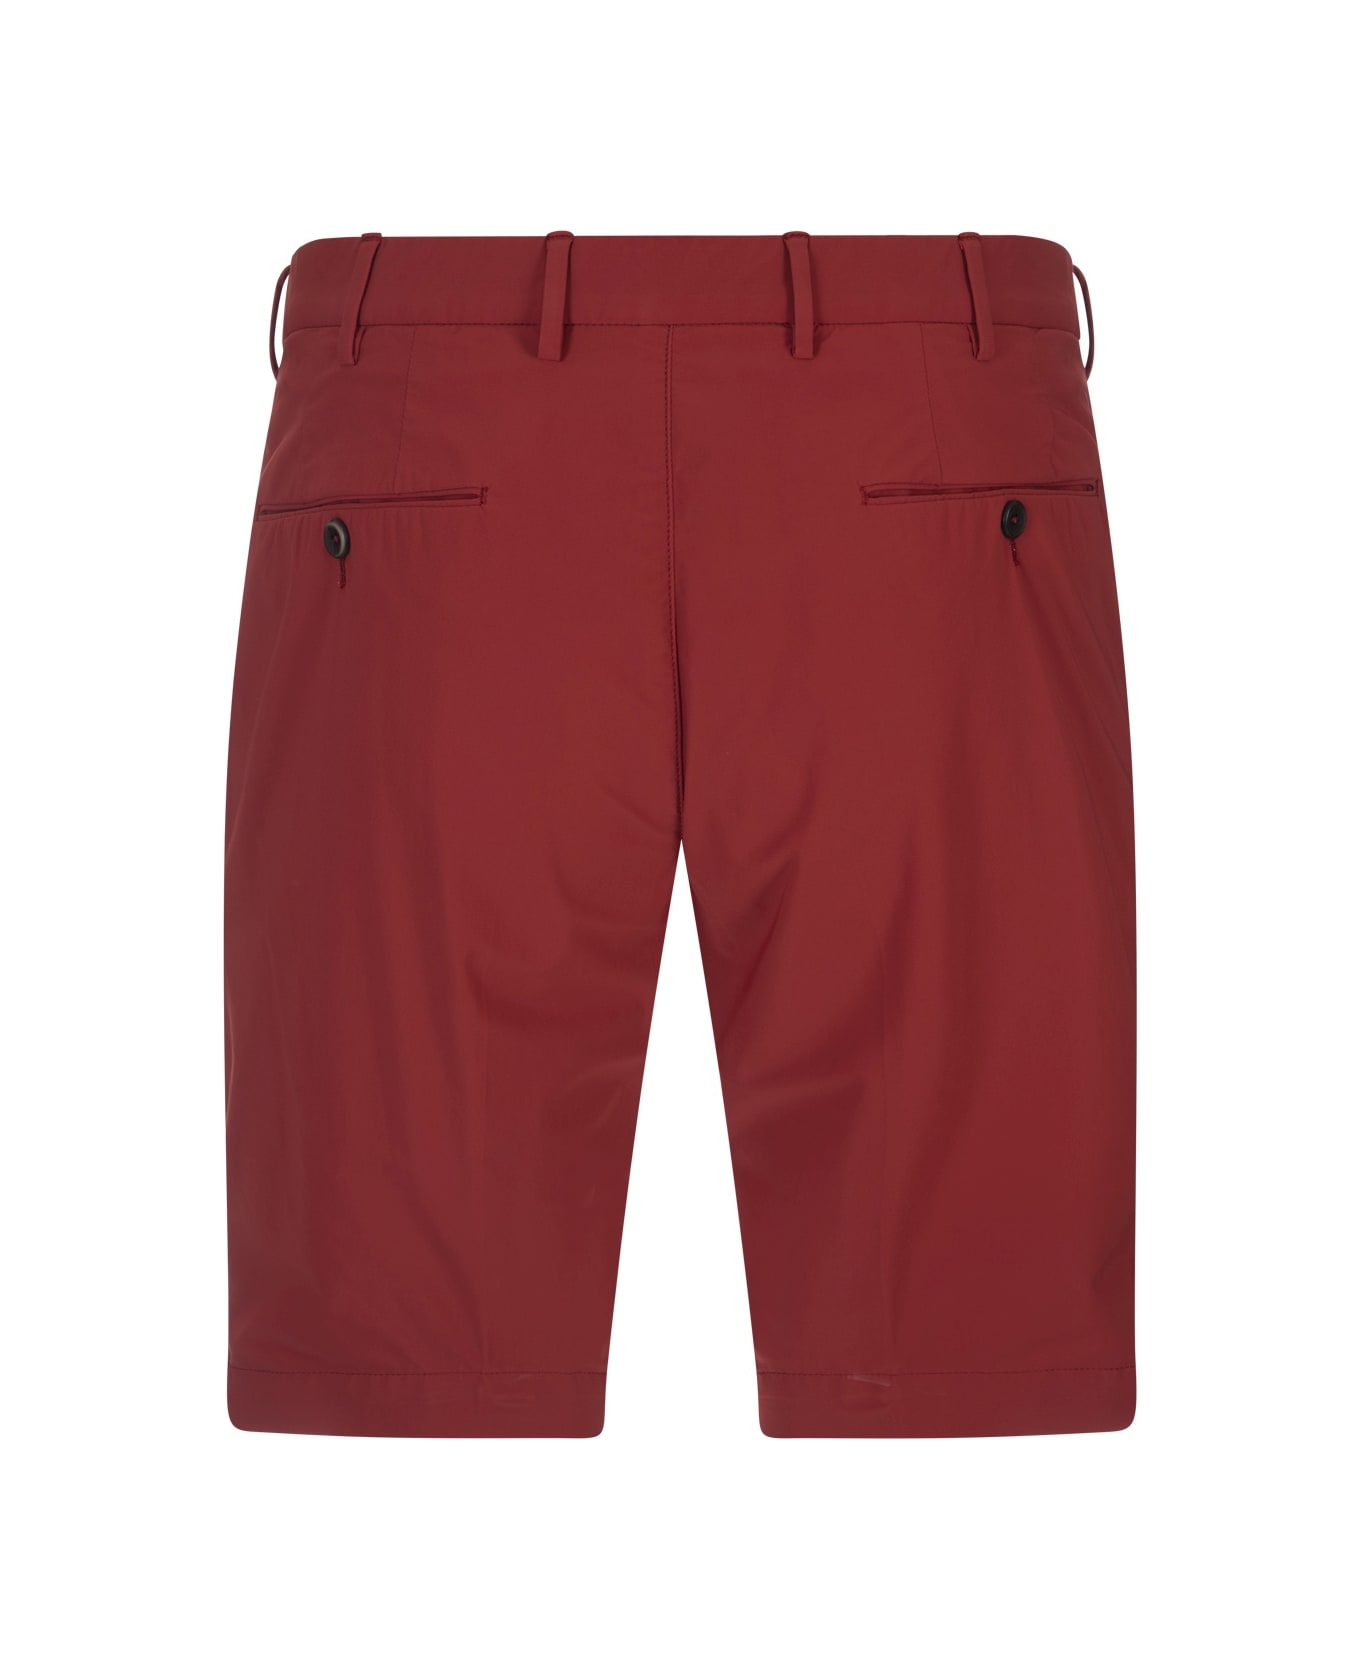 PT Bermuda Red Stretch Cotton Shorts - Red